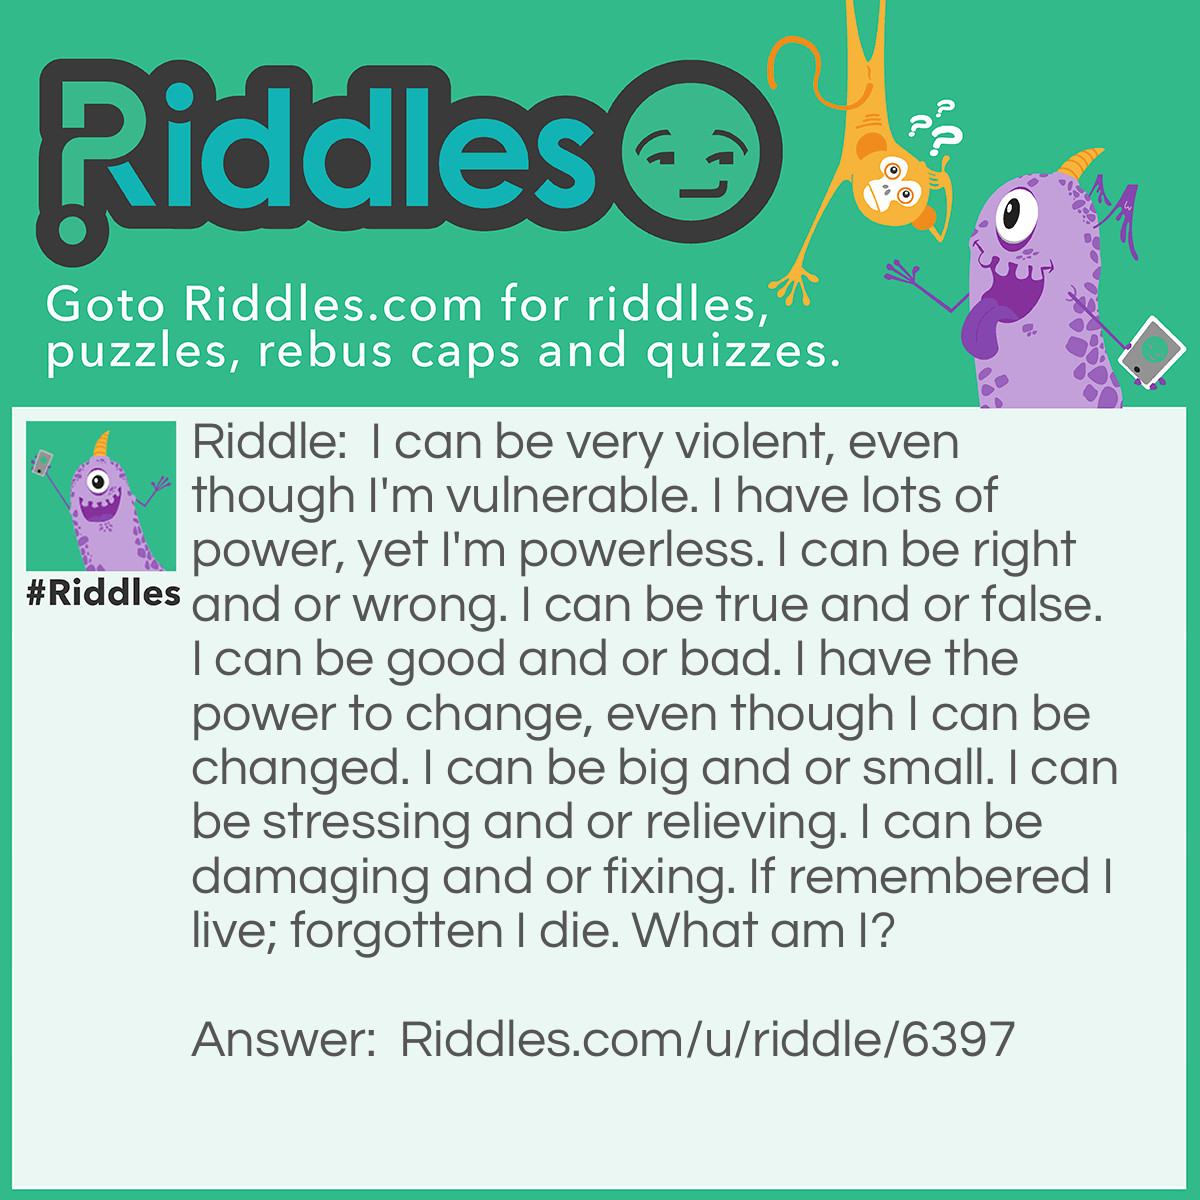 Riddle: I can be very violent, even though I'm vulnerable. I have lots of power, yet I'm powerless. I can be right and or wrong. I can be true and or false. I can be good and or bad. I have the power to change, even though I can be changed. I can be big and or small. I can be stressing and or relieving. I can be damaging and or fixing. If remembered I live; forgotten I die. What am I? Answer: Answer: idea Other answers: thought, memory.